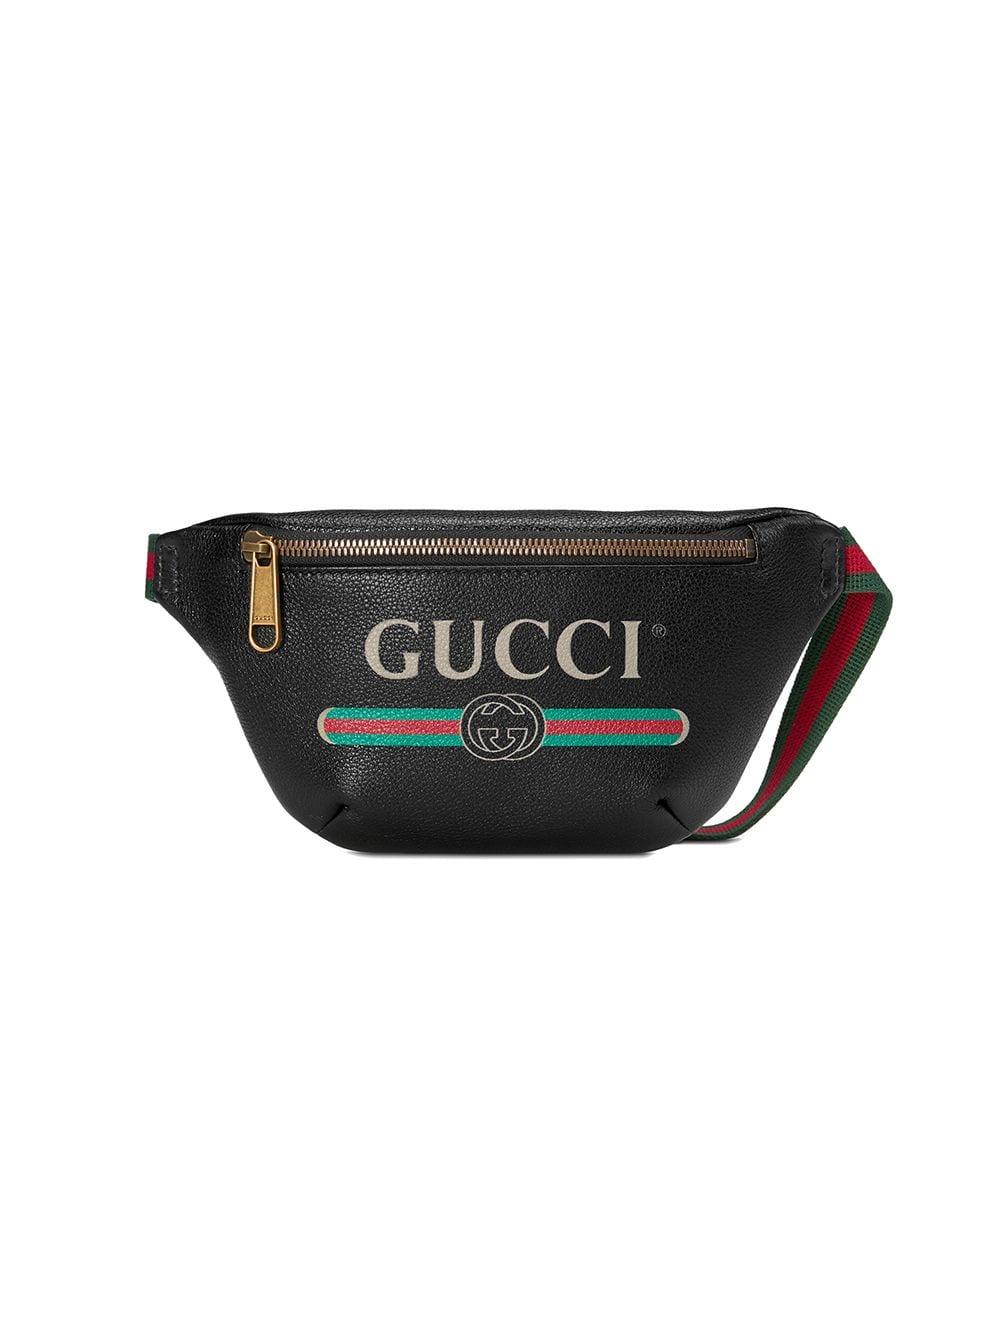 Gucci Leather Print Small Belt Bag in Black Leather (Black) - Lyst